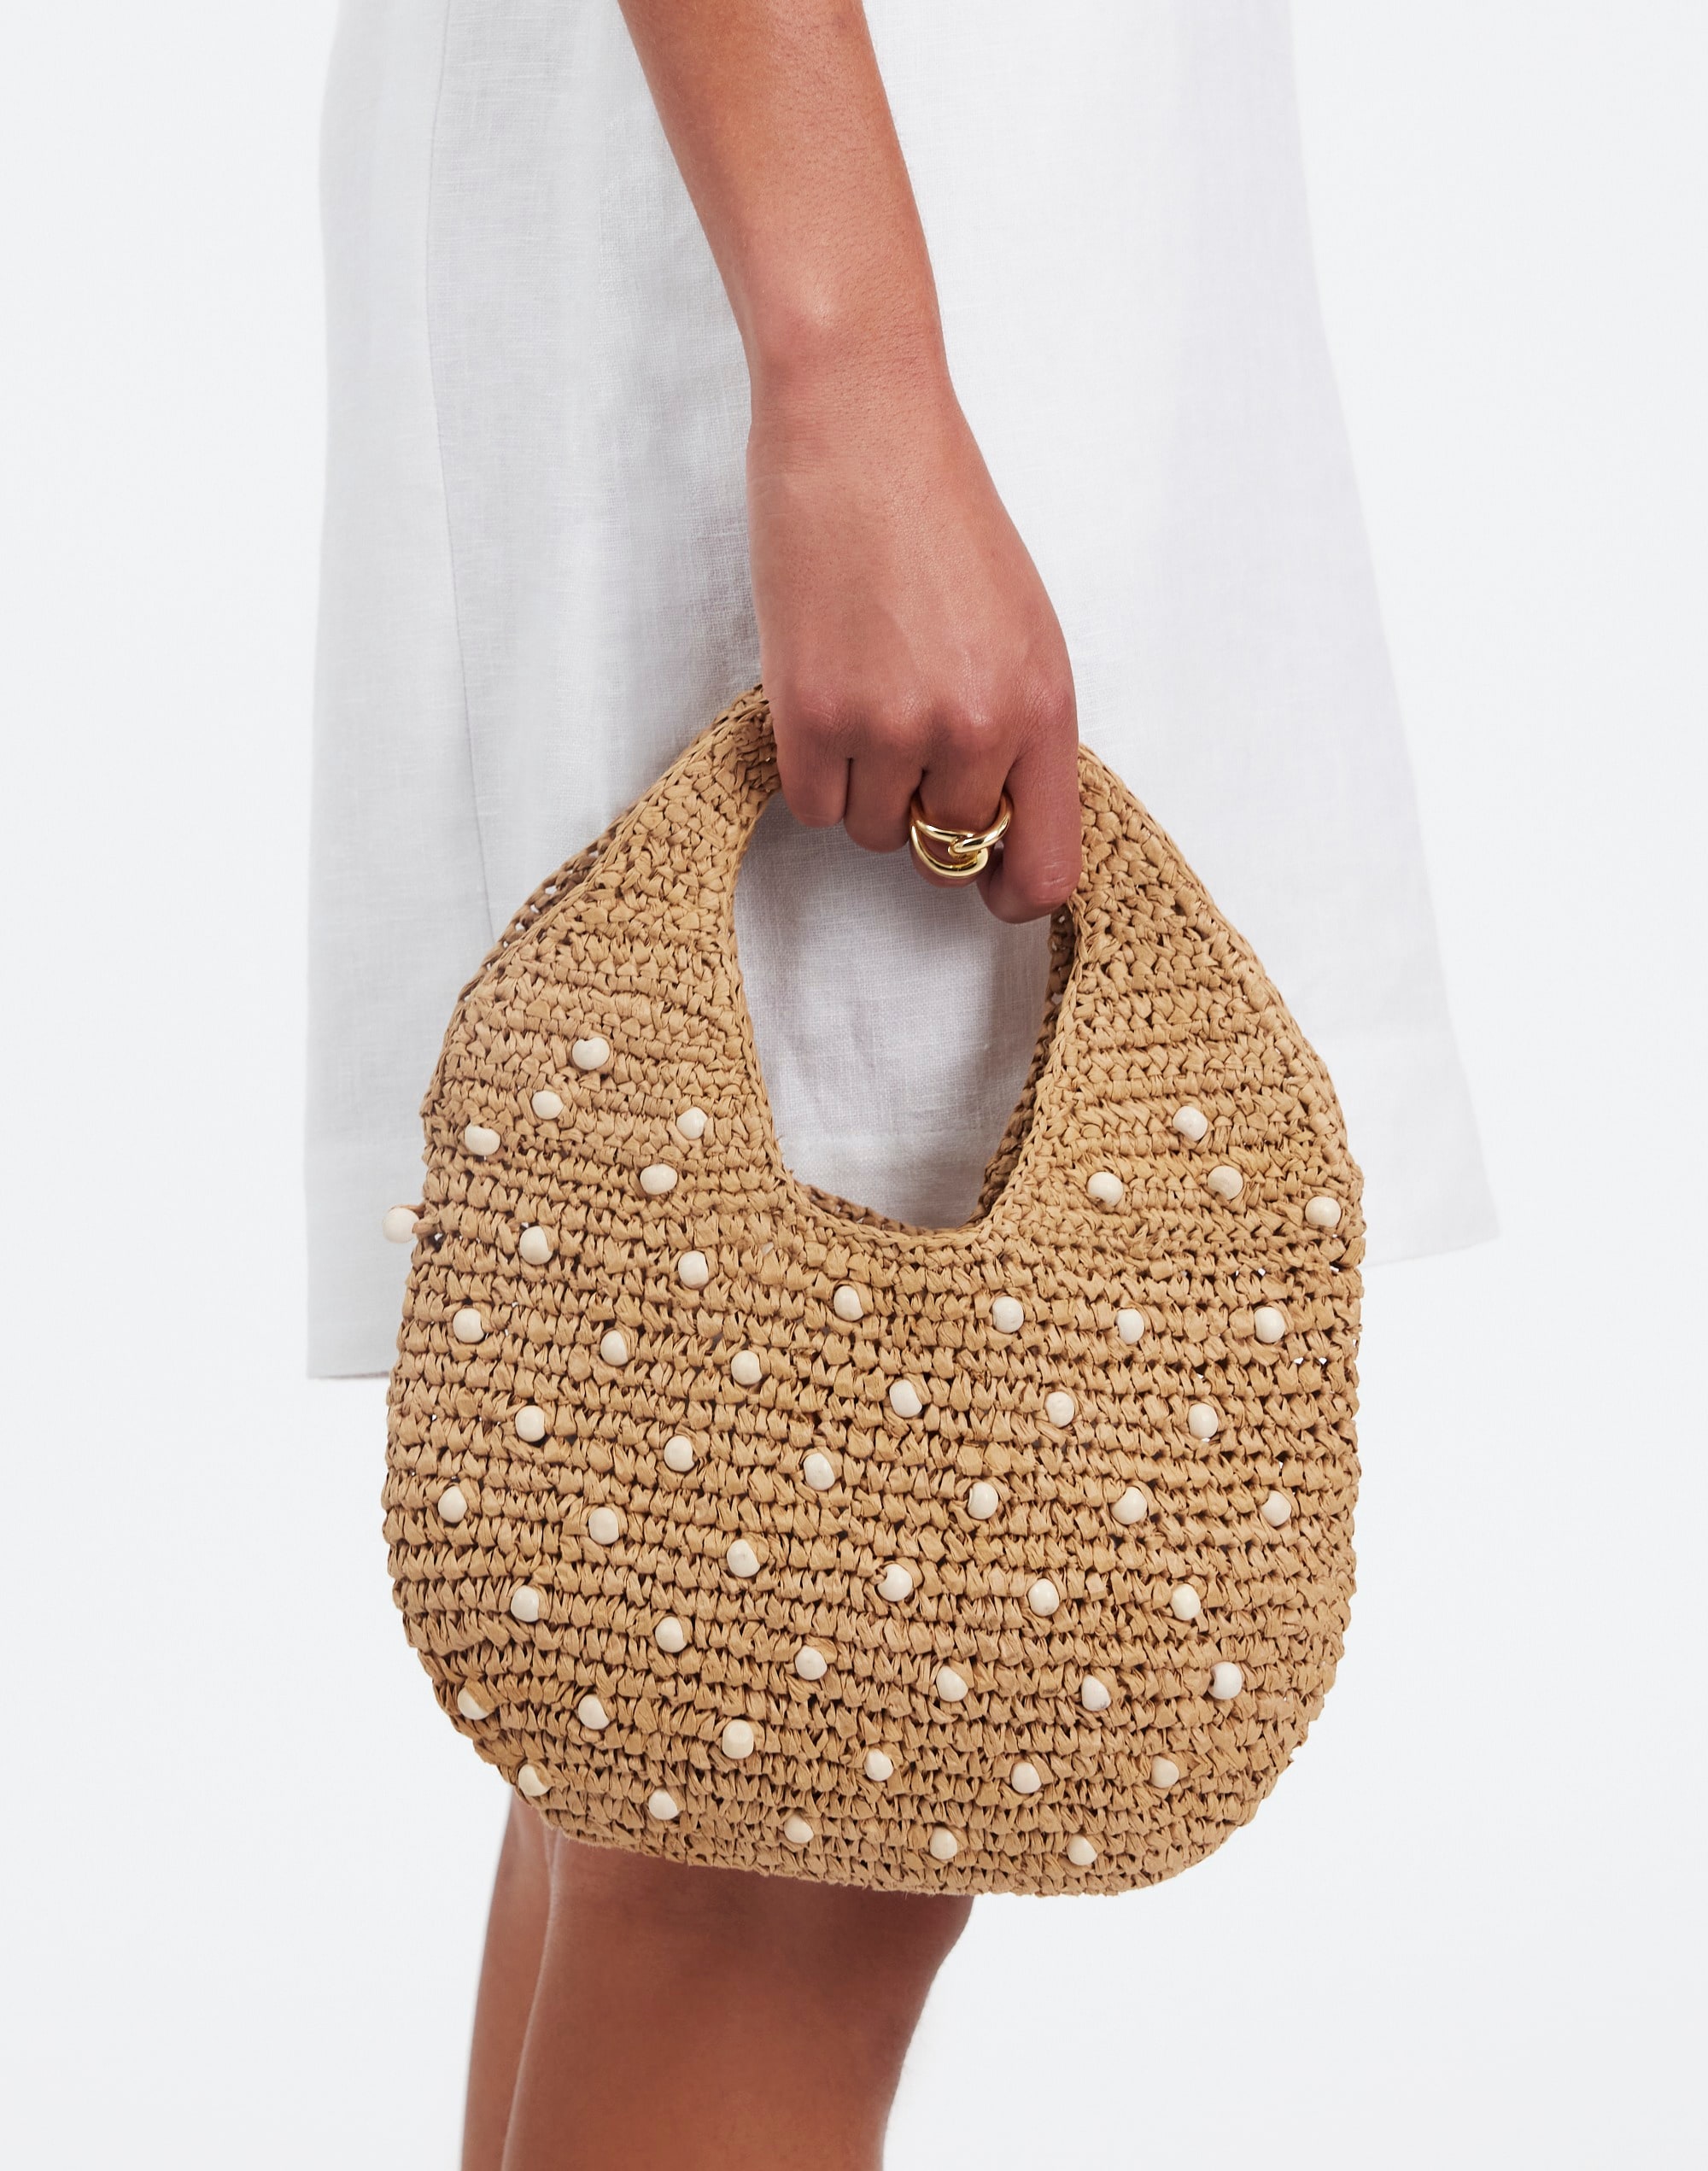 The Micro Bag in Embellished Straw